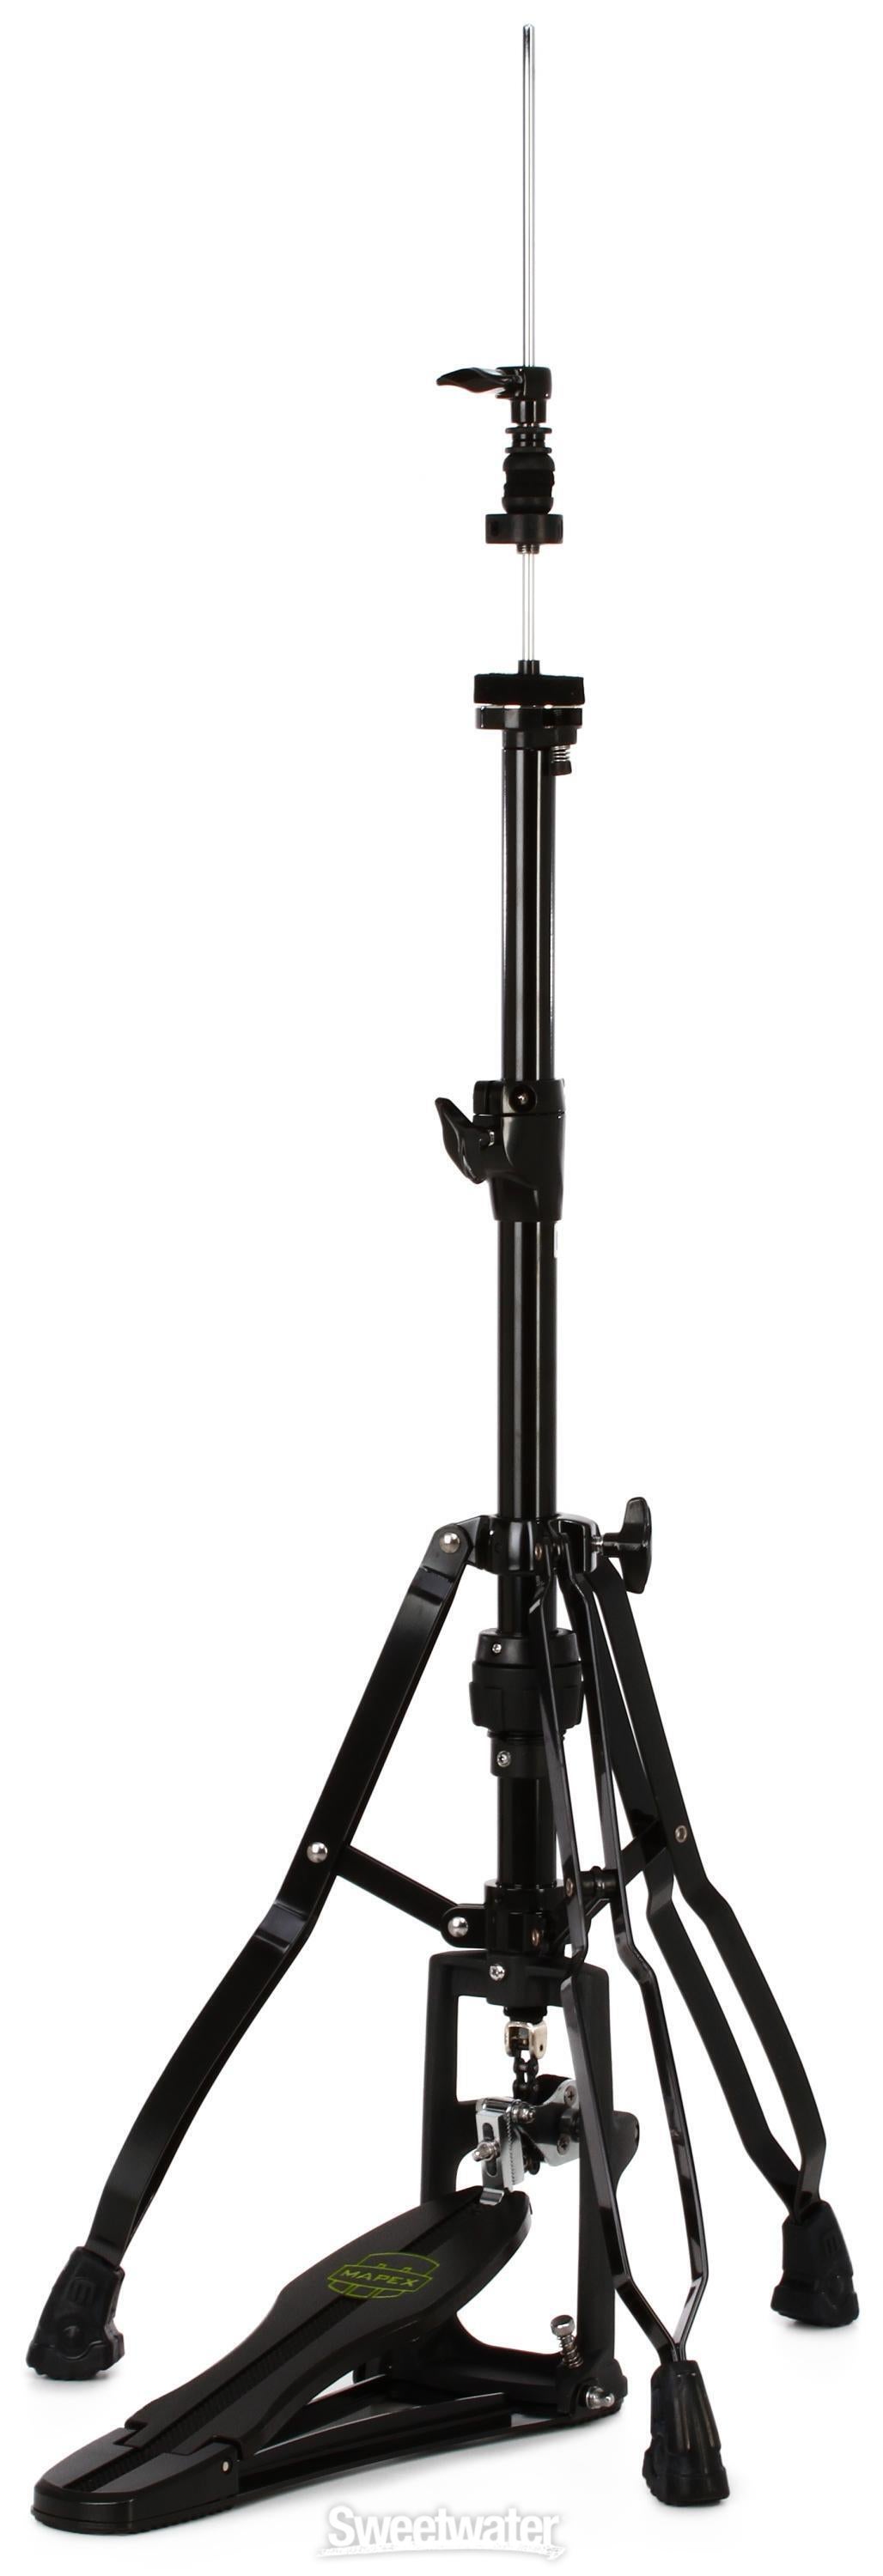 Mapex H800EB Armory Series Double Braced Hi-Hat Stand - Black Plated - 3-leg